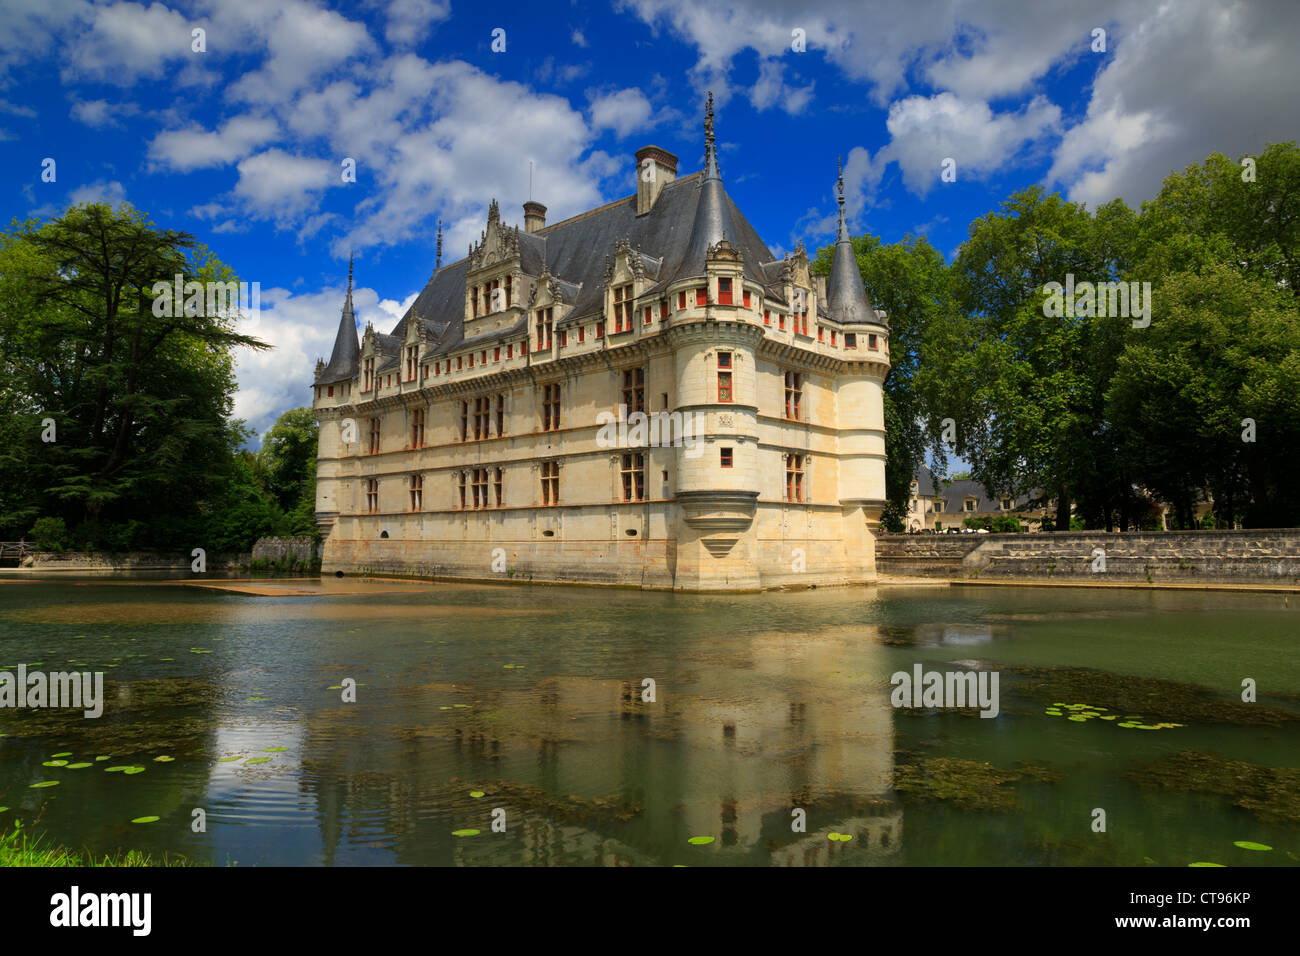 Chateau of Azay-le-Rideau. Built in the reign of Francois I by Gilles Berthelot, one of the earliest Renaissance chateaux. Stock Photo